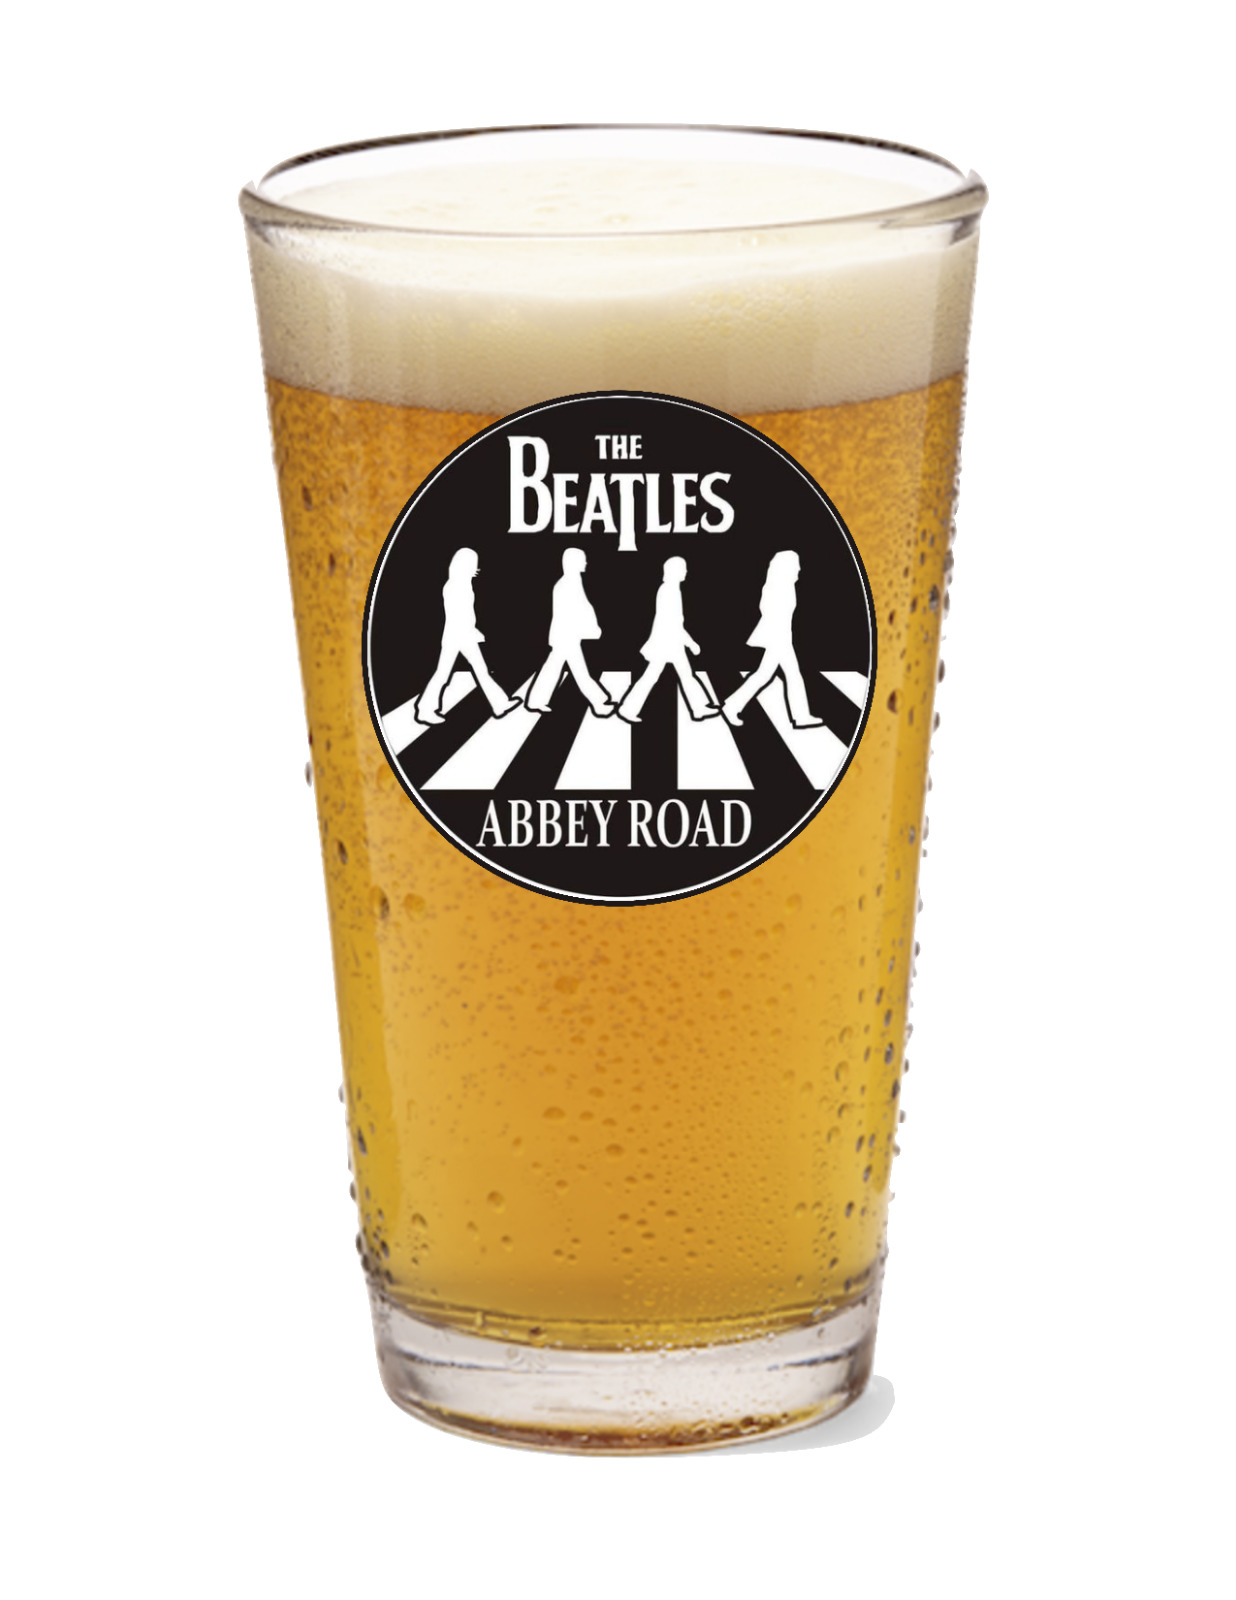 The Beatles - Abbey Road  - Rock and Roll - 16oz Pint Beer Glass Pub Barware B/W